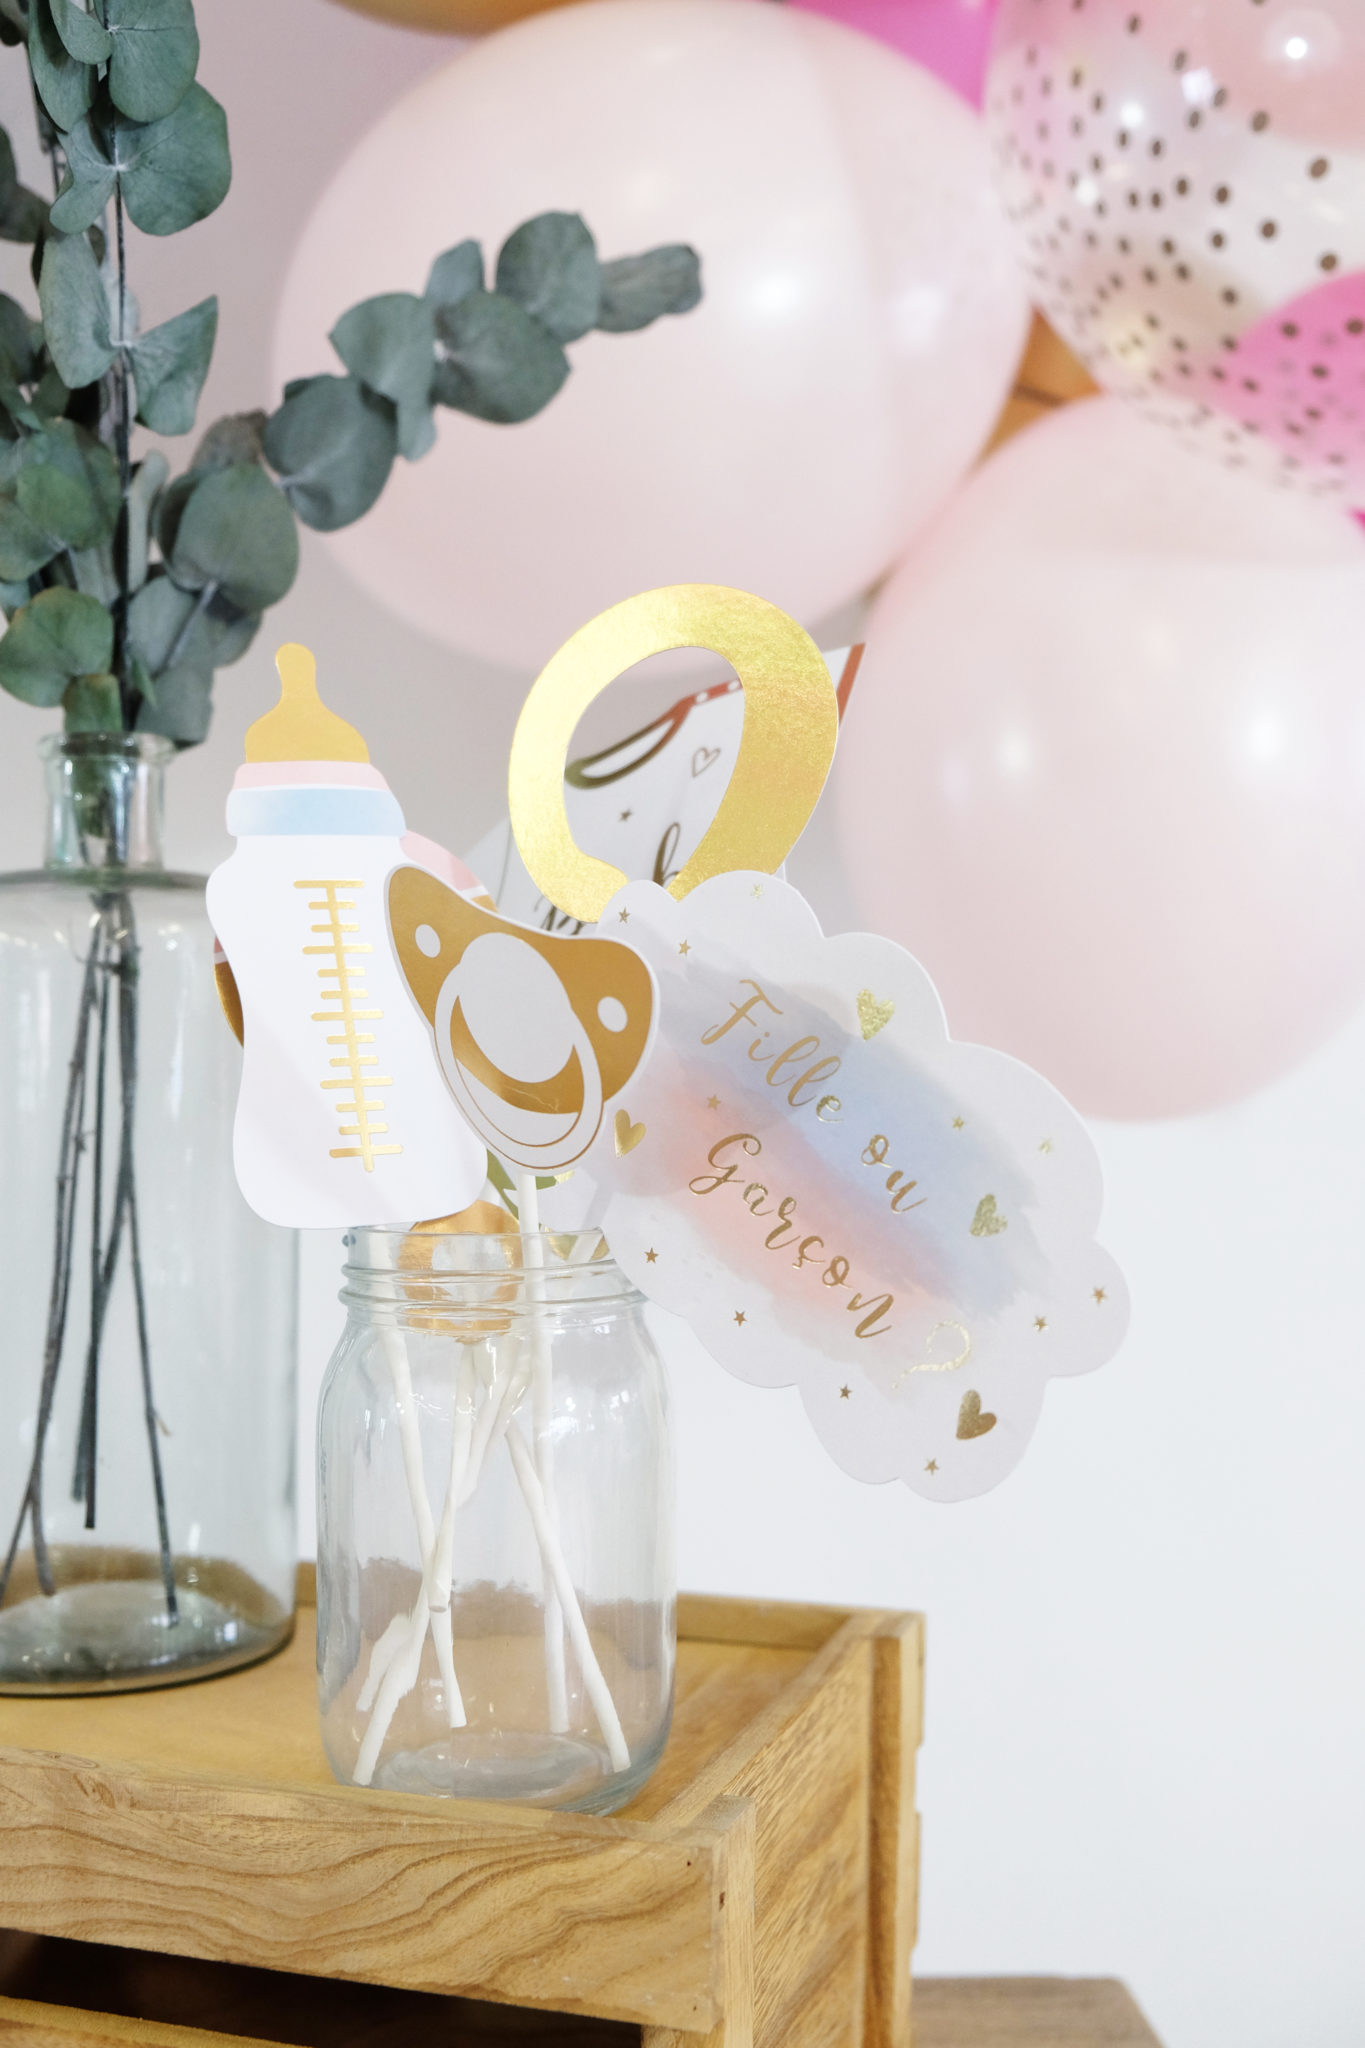 Comment Organiser Une Gender Reveal Party